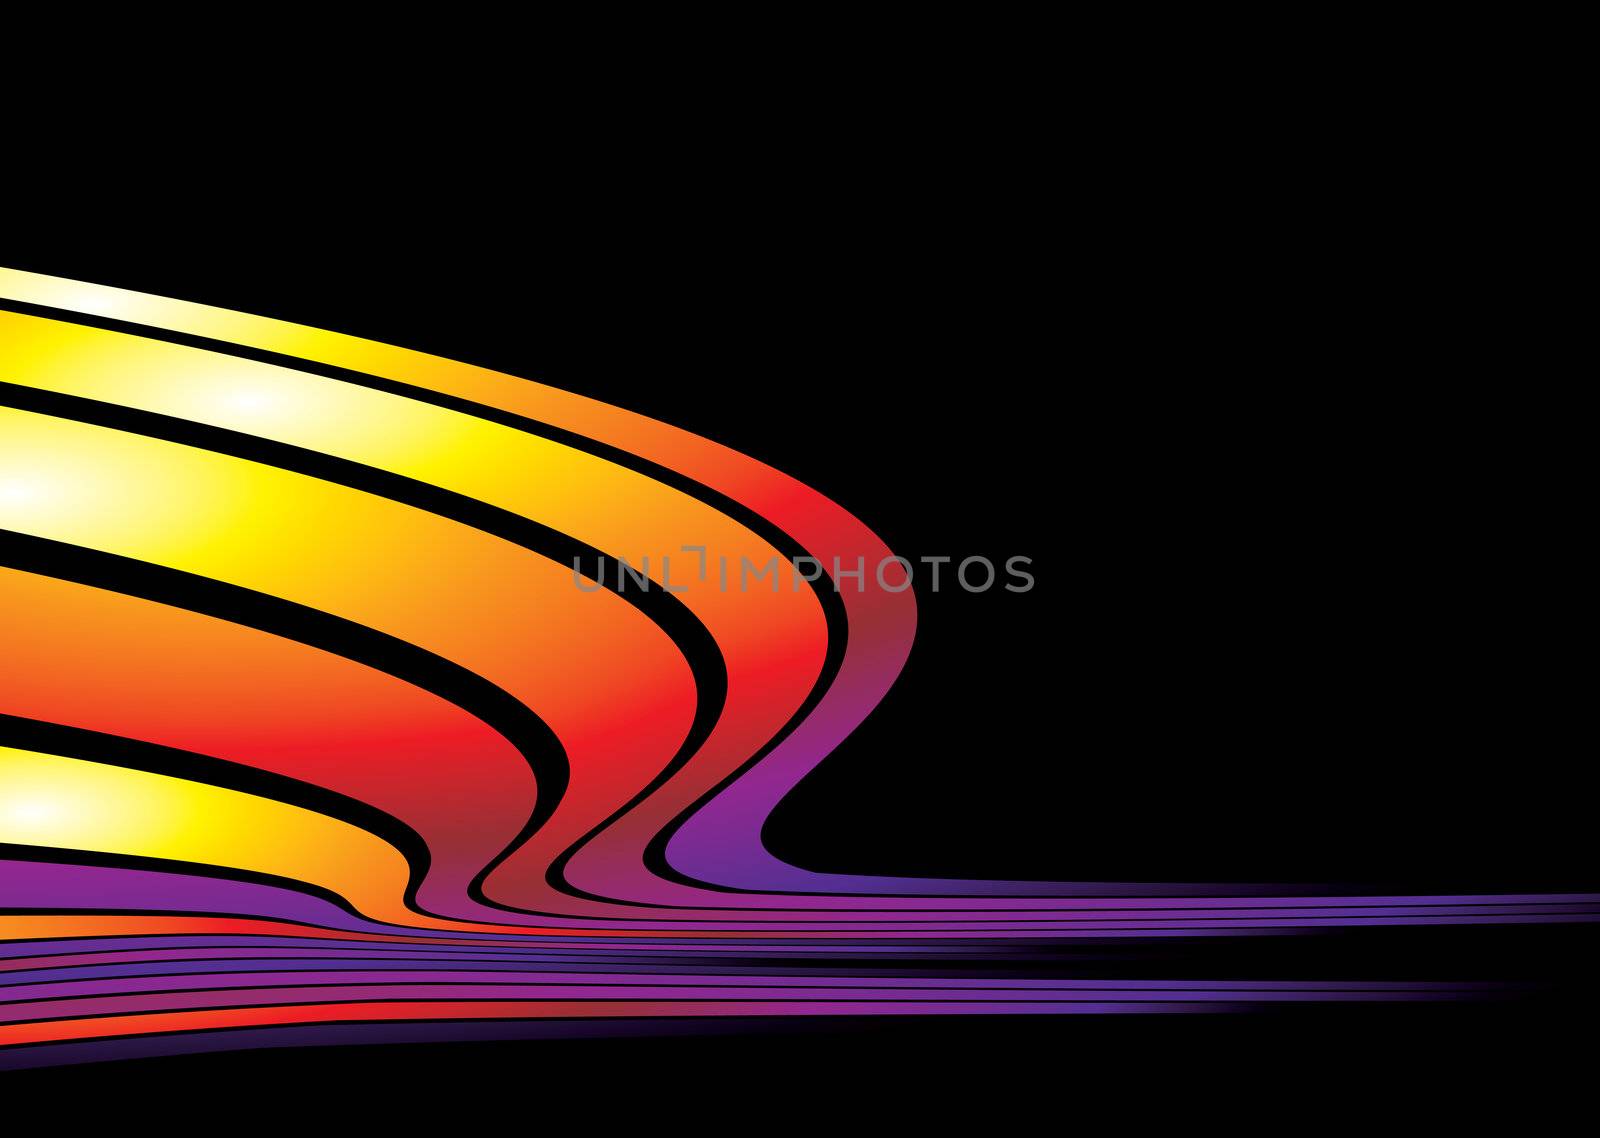 Colourful illustrated abstract background with a wave design